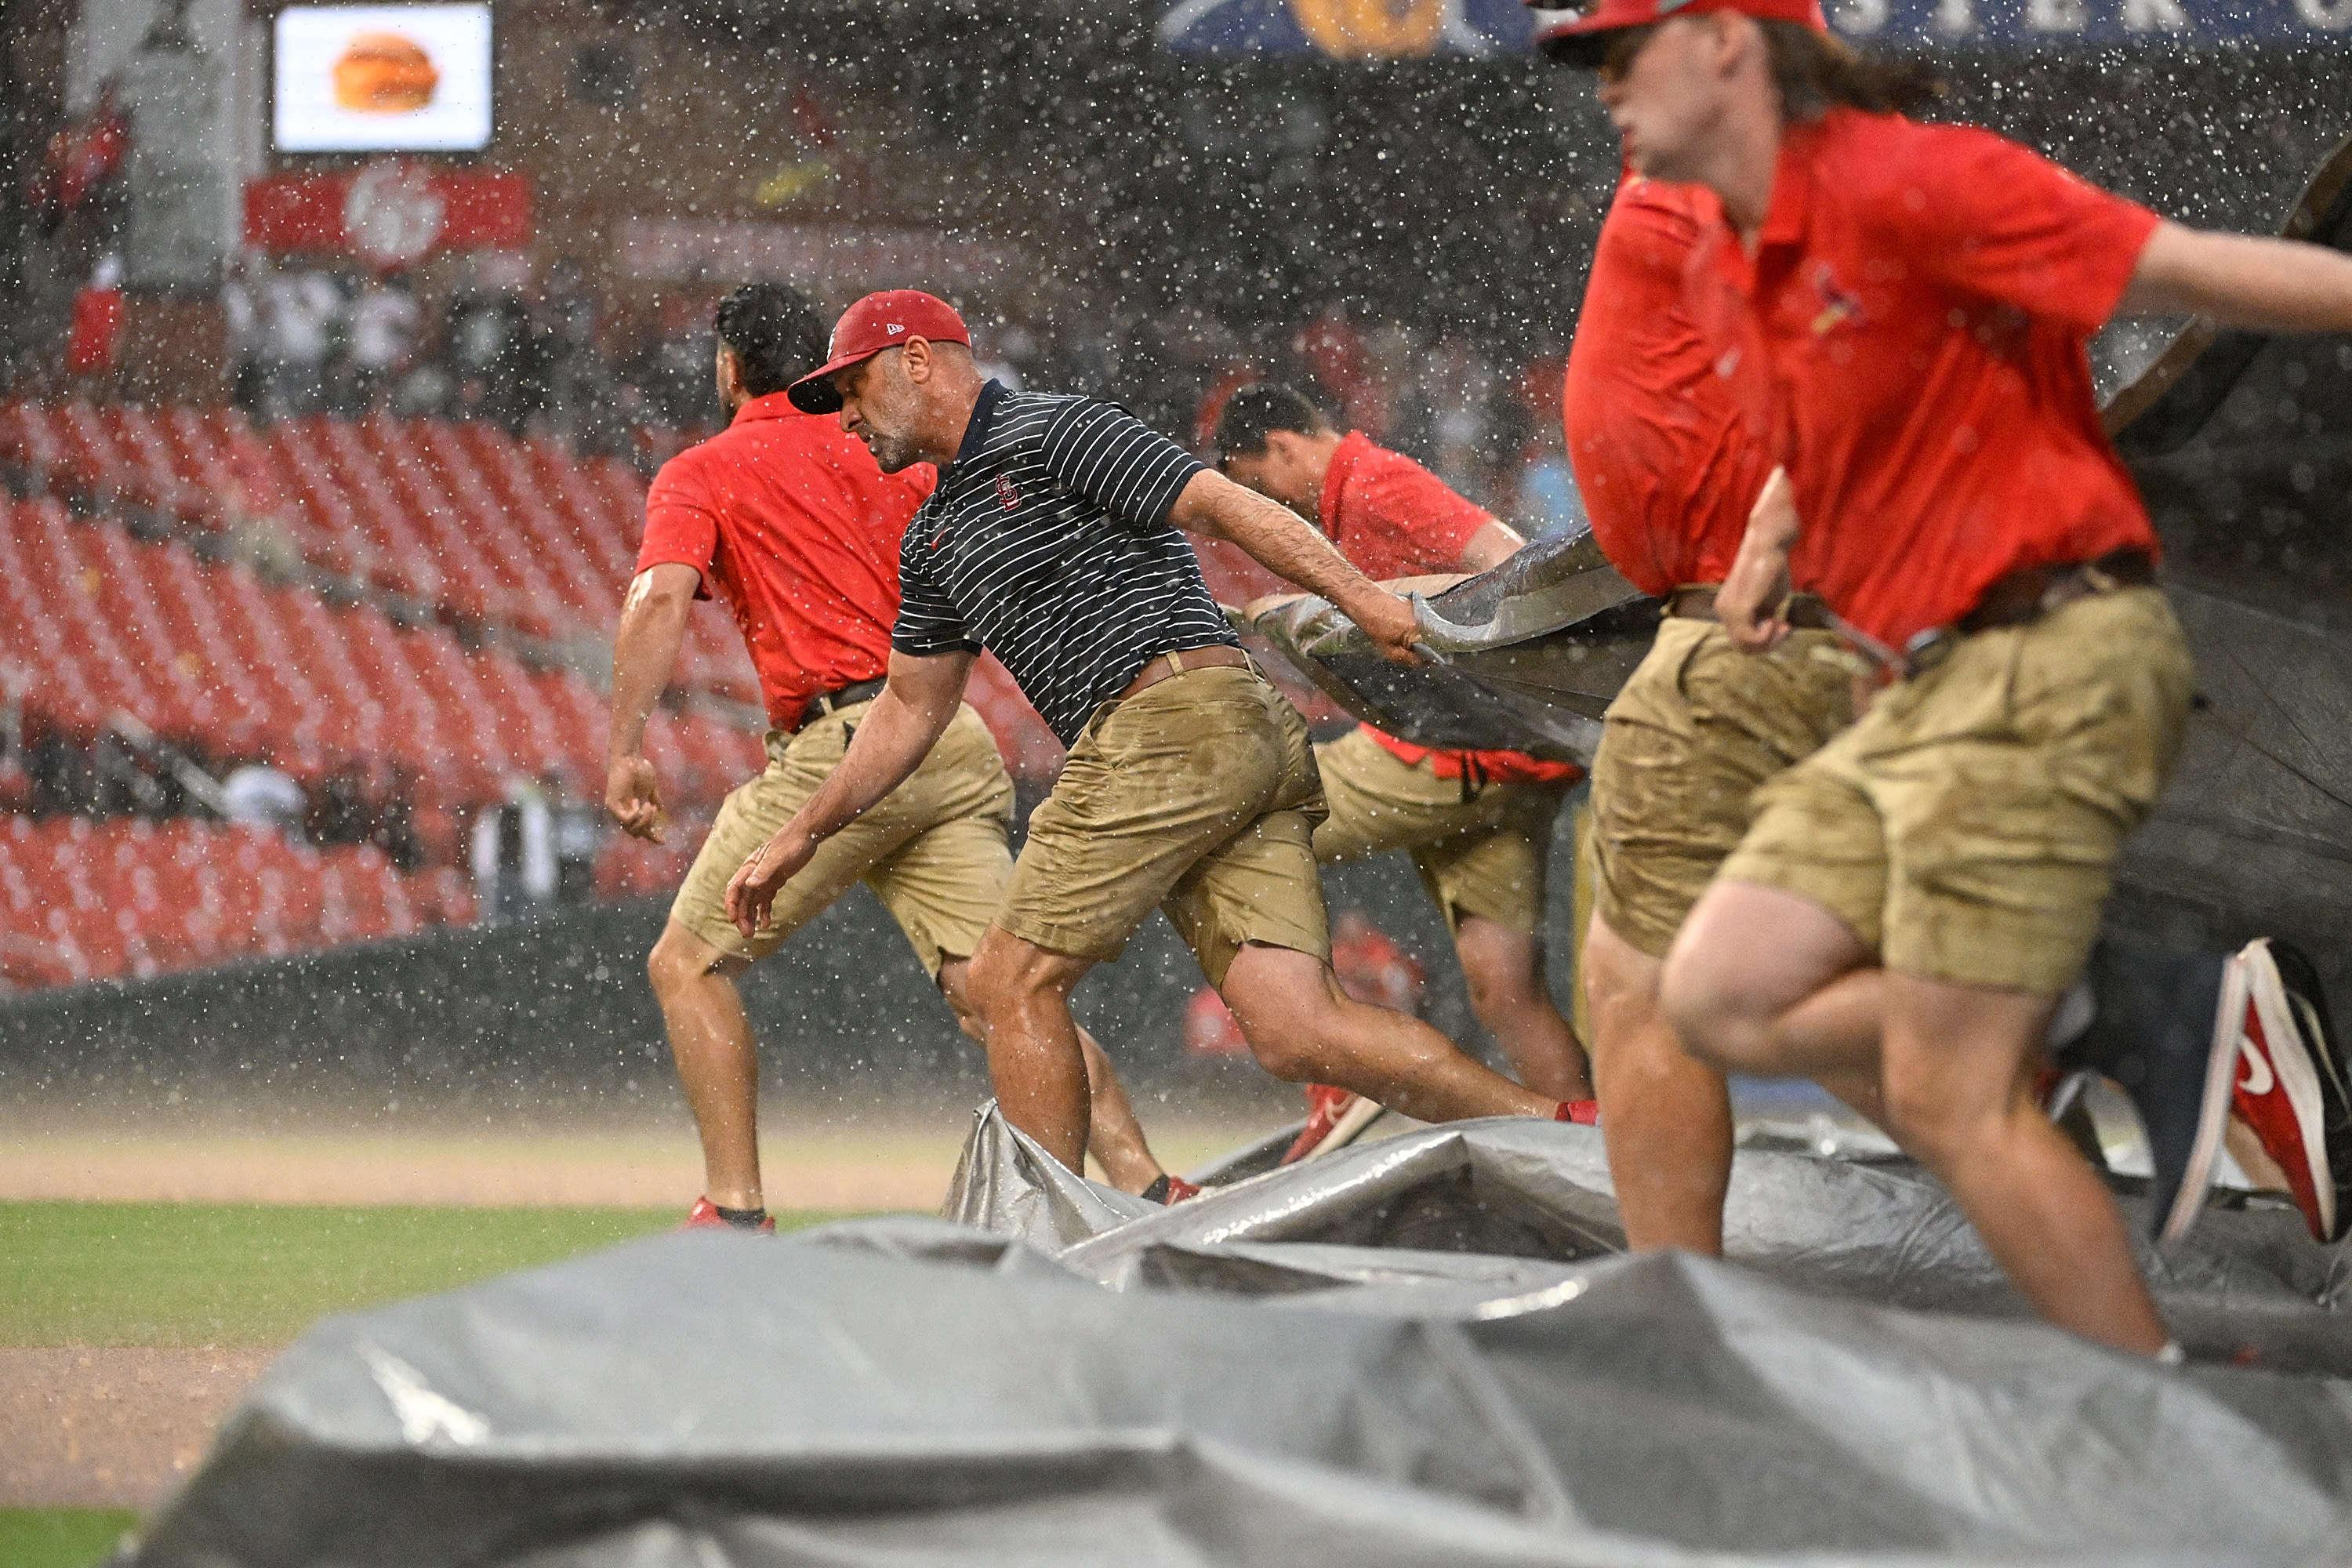 Updates from Cubs-Cardinals rain delay. Here's what we know